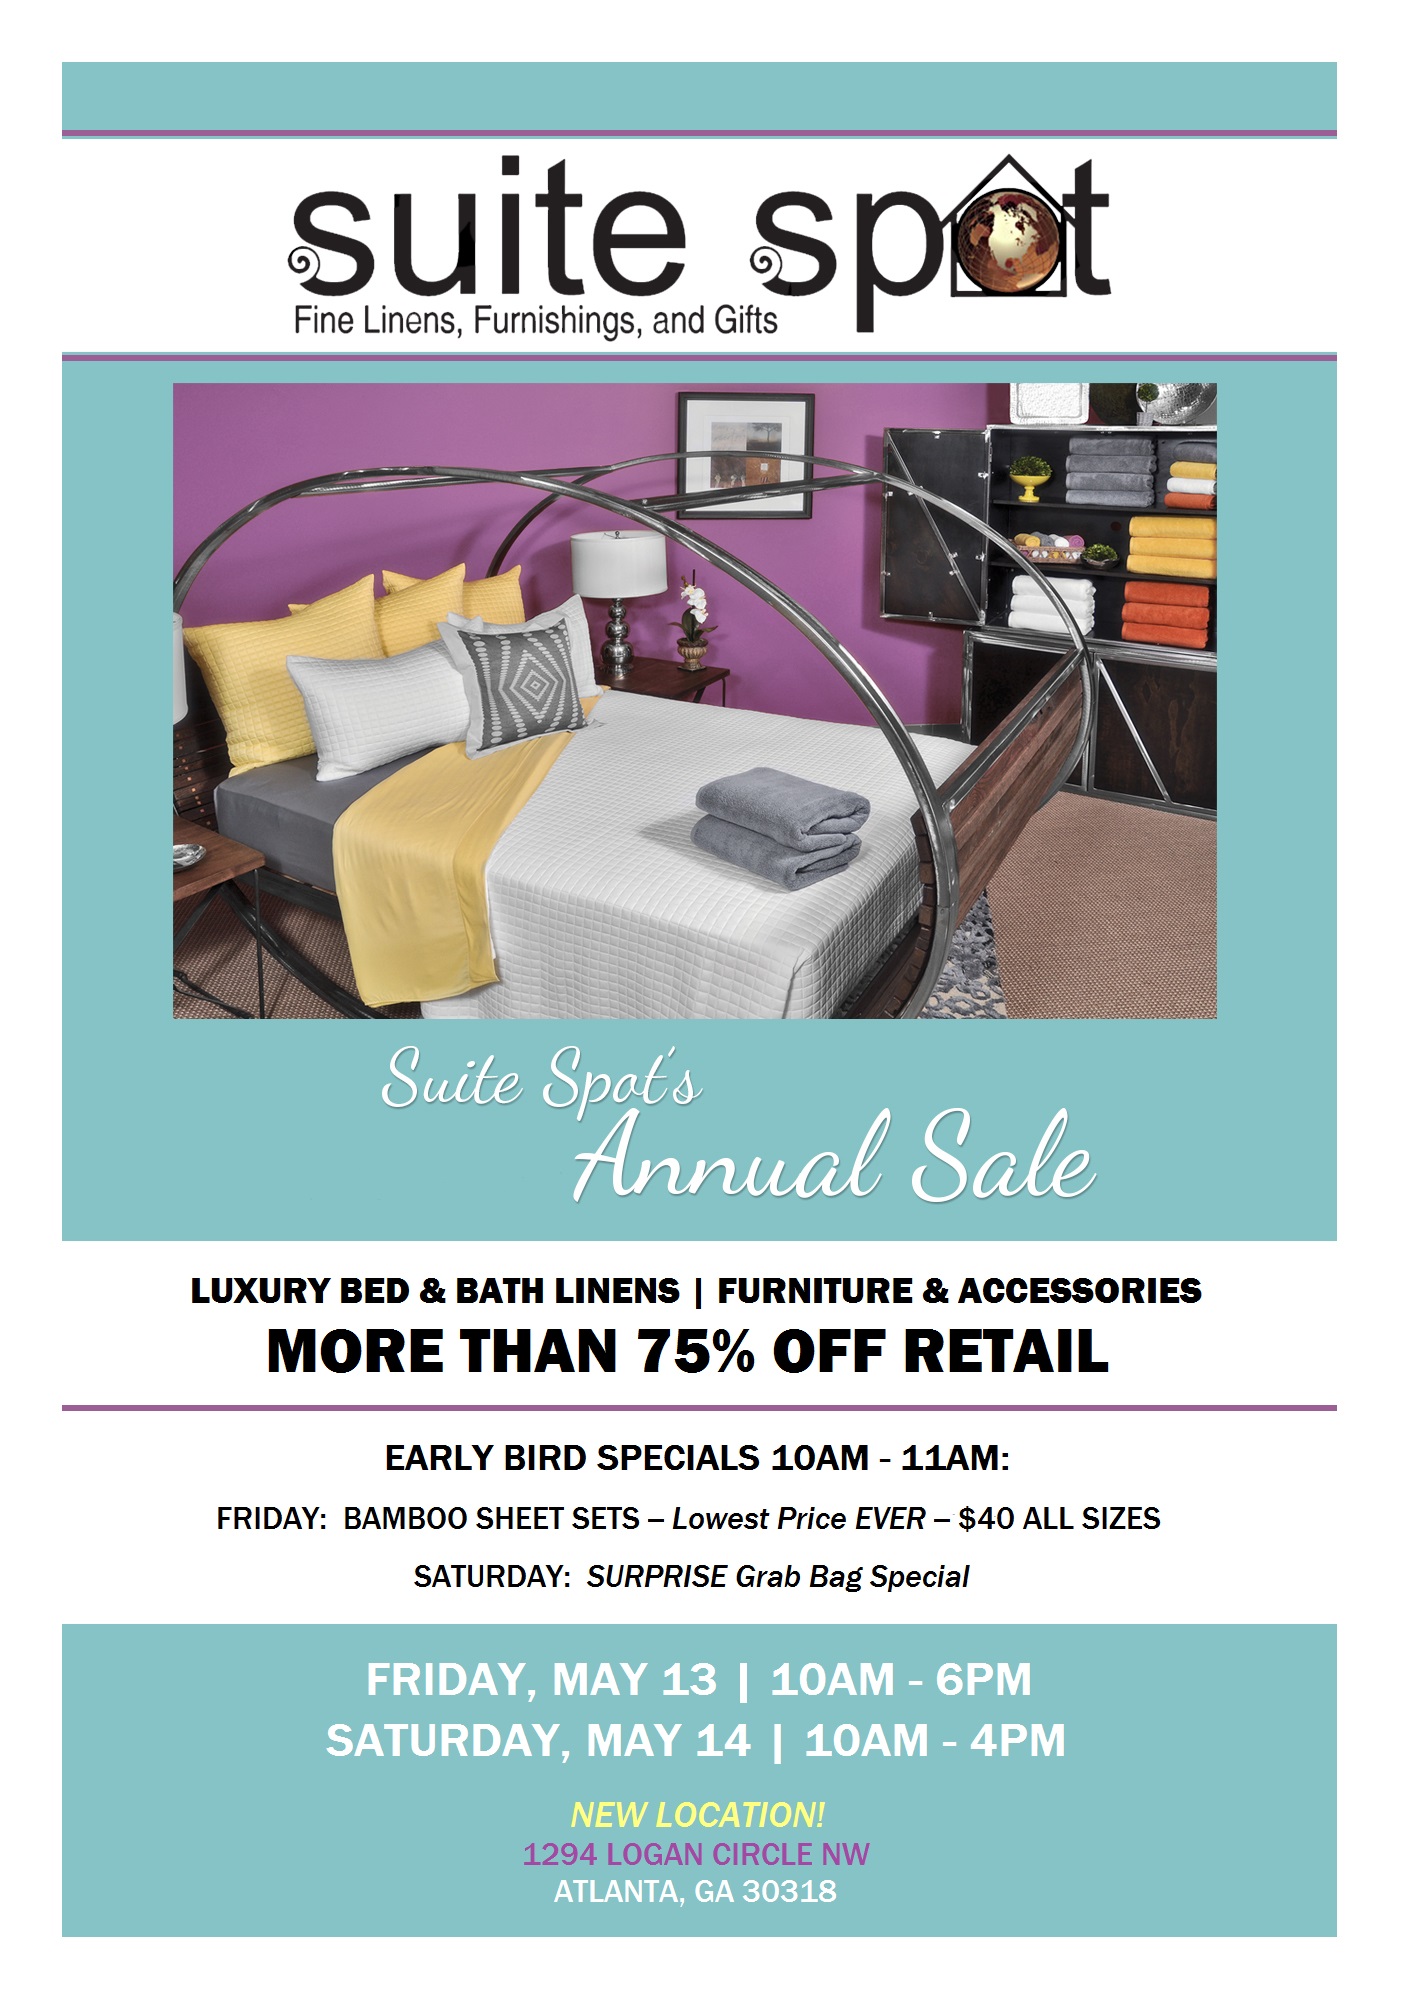 Suite Spot’s Annual Warehouse Sale is back for the last time!